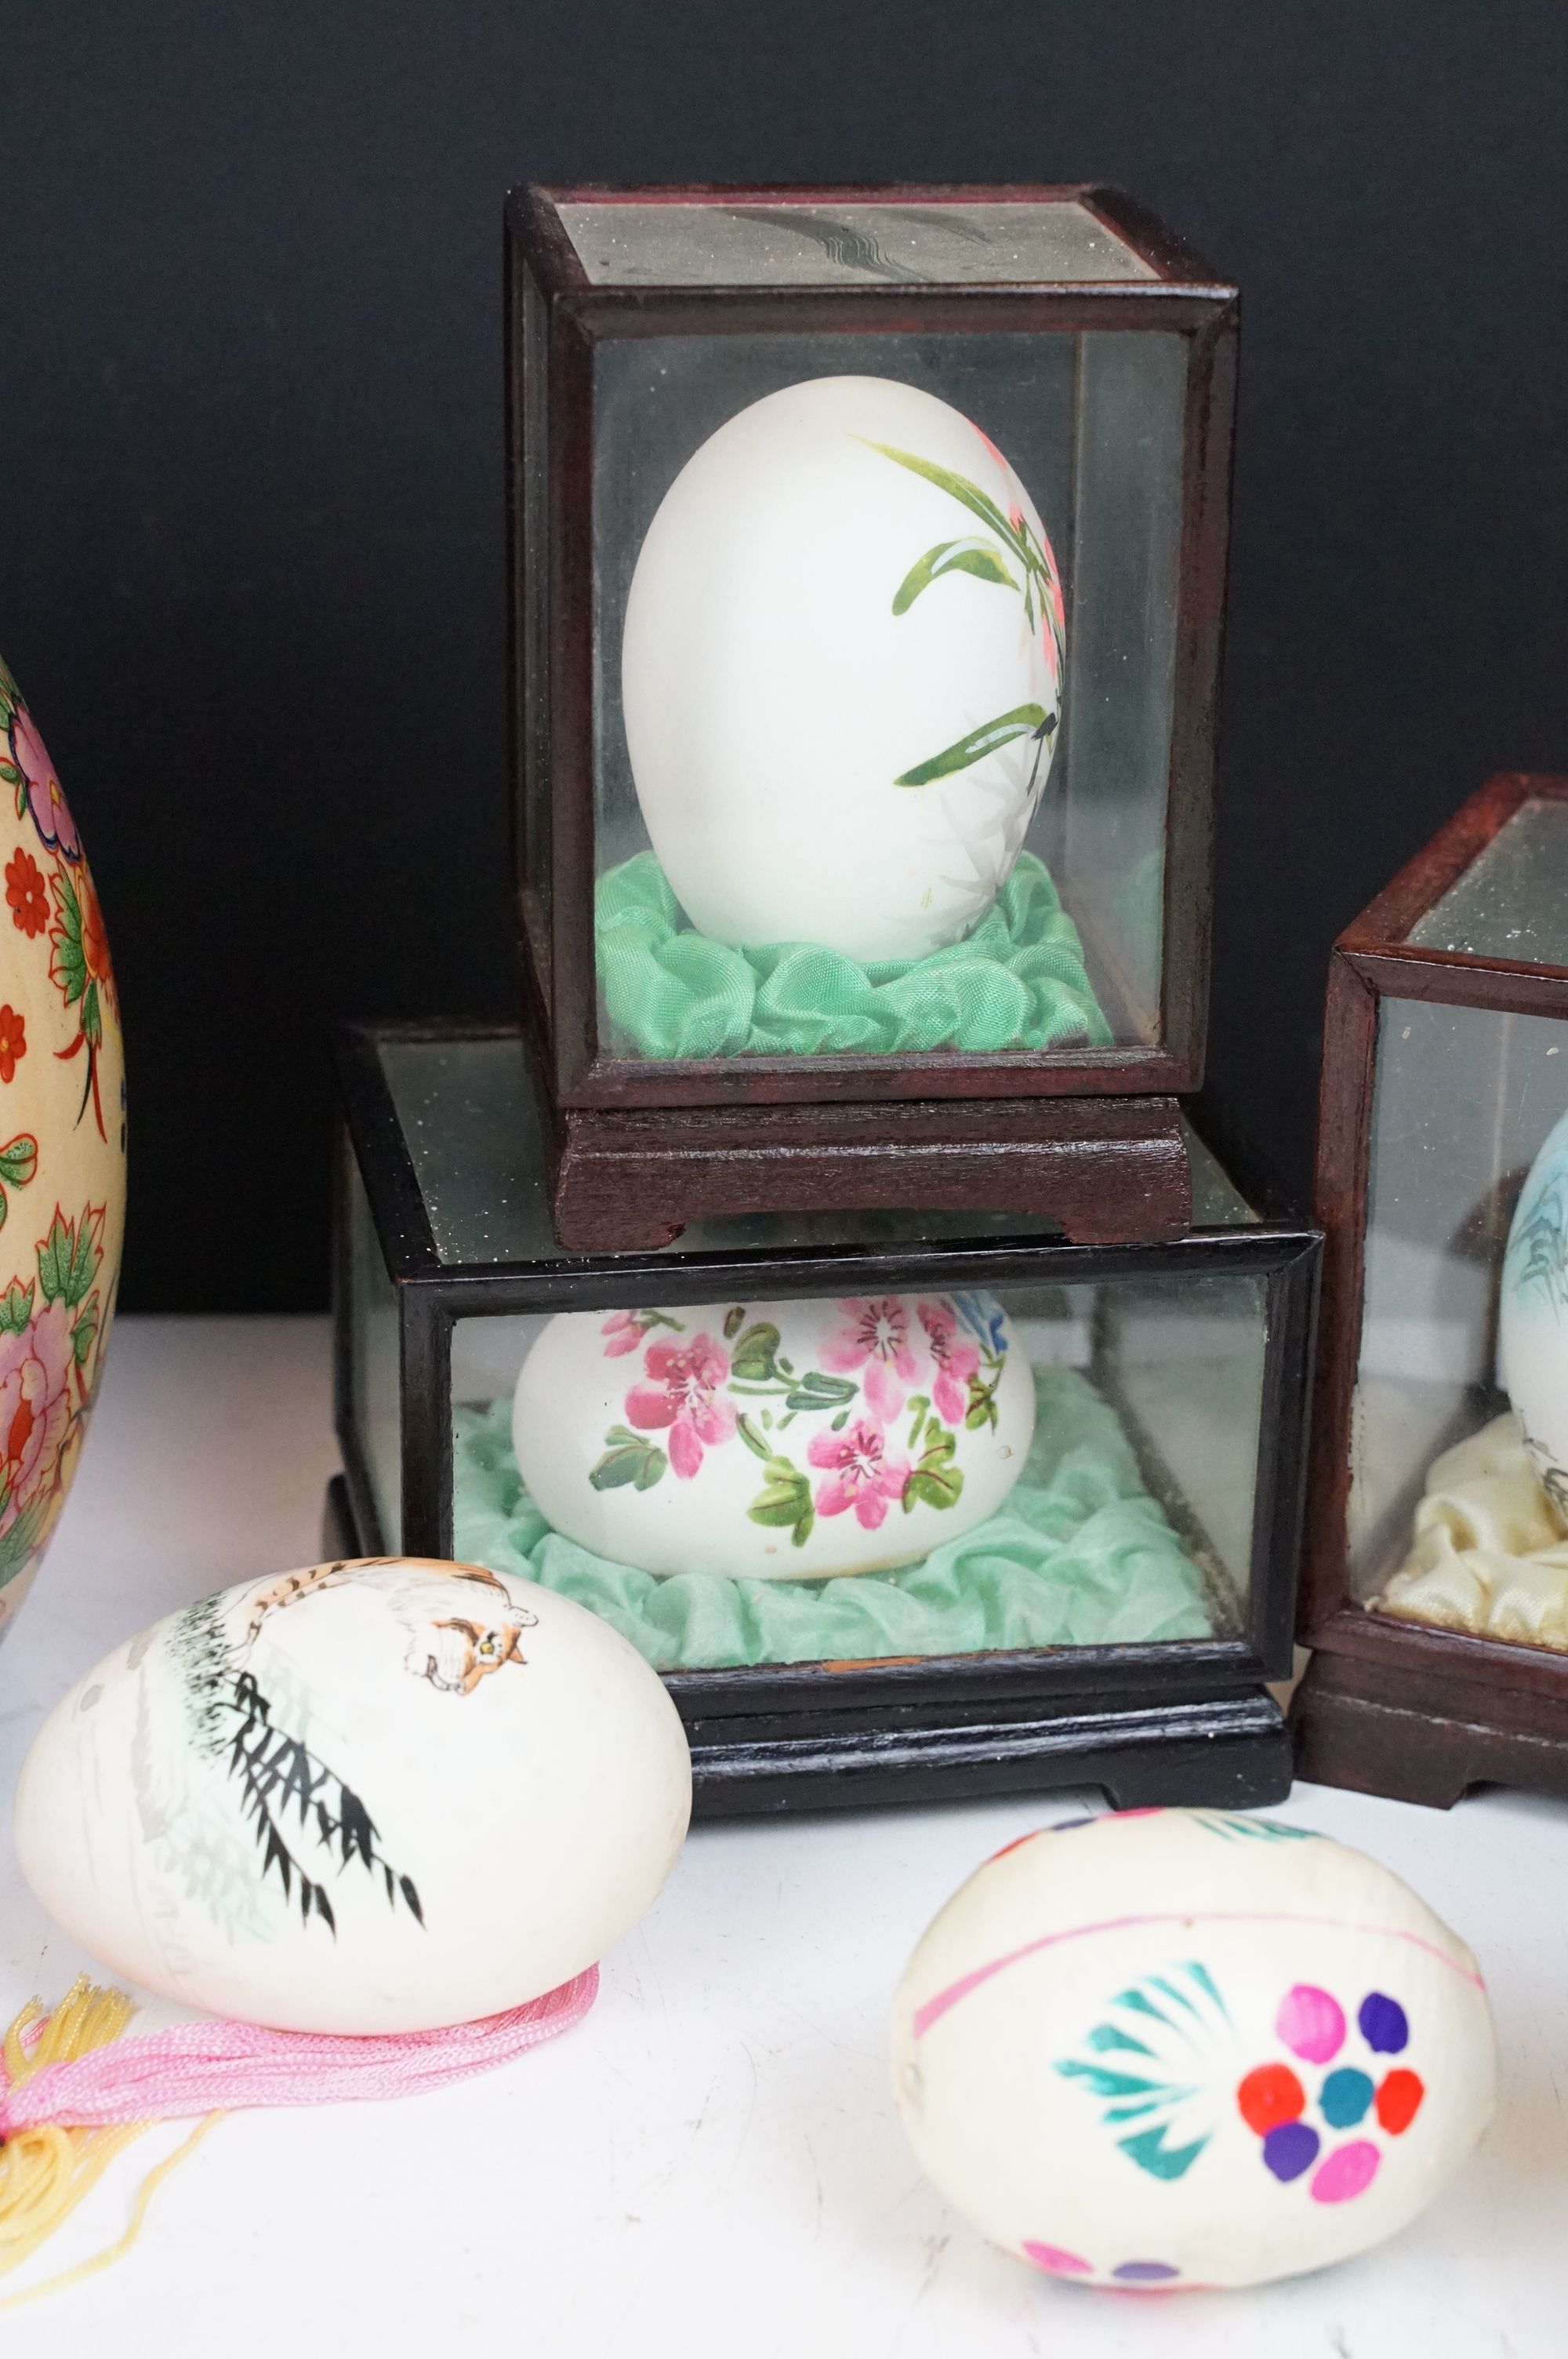 Collection of Chinese painted eggs including some in small display cases, and some ceramic examples. - Image 4 of 6